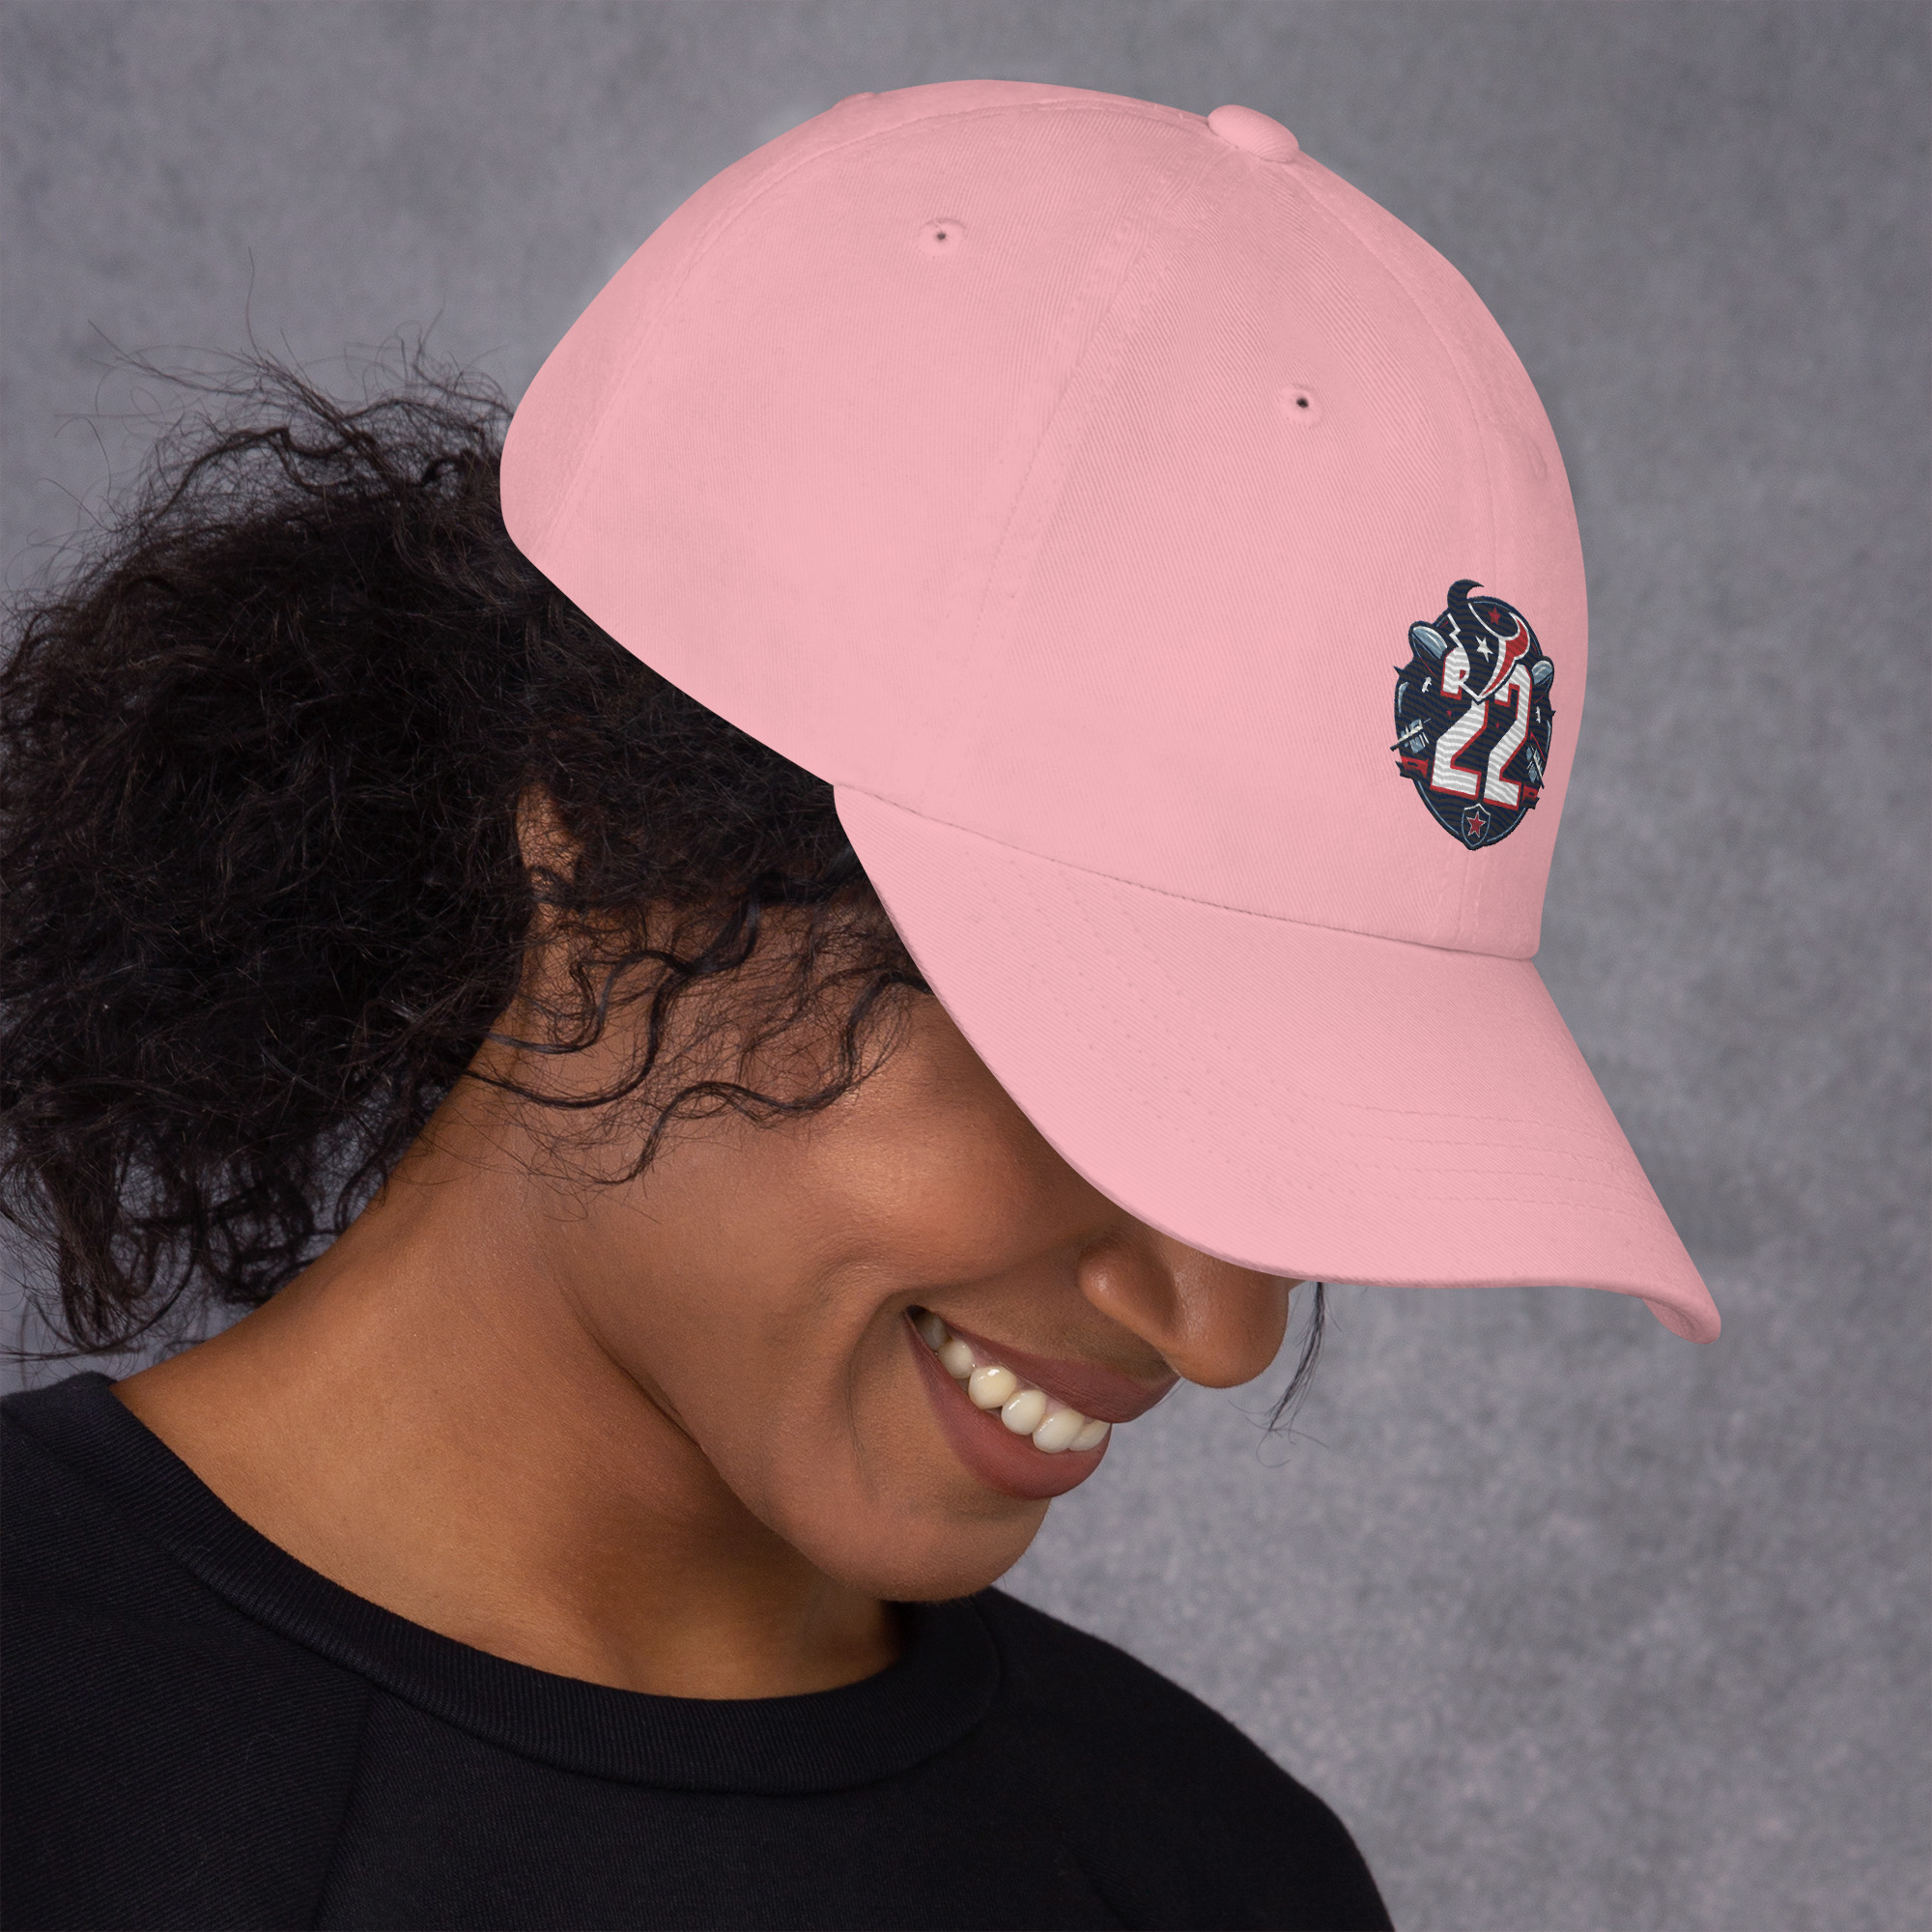 classic-dad-hat-pink-right-side-6684d5a10ce15.jpg